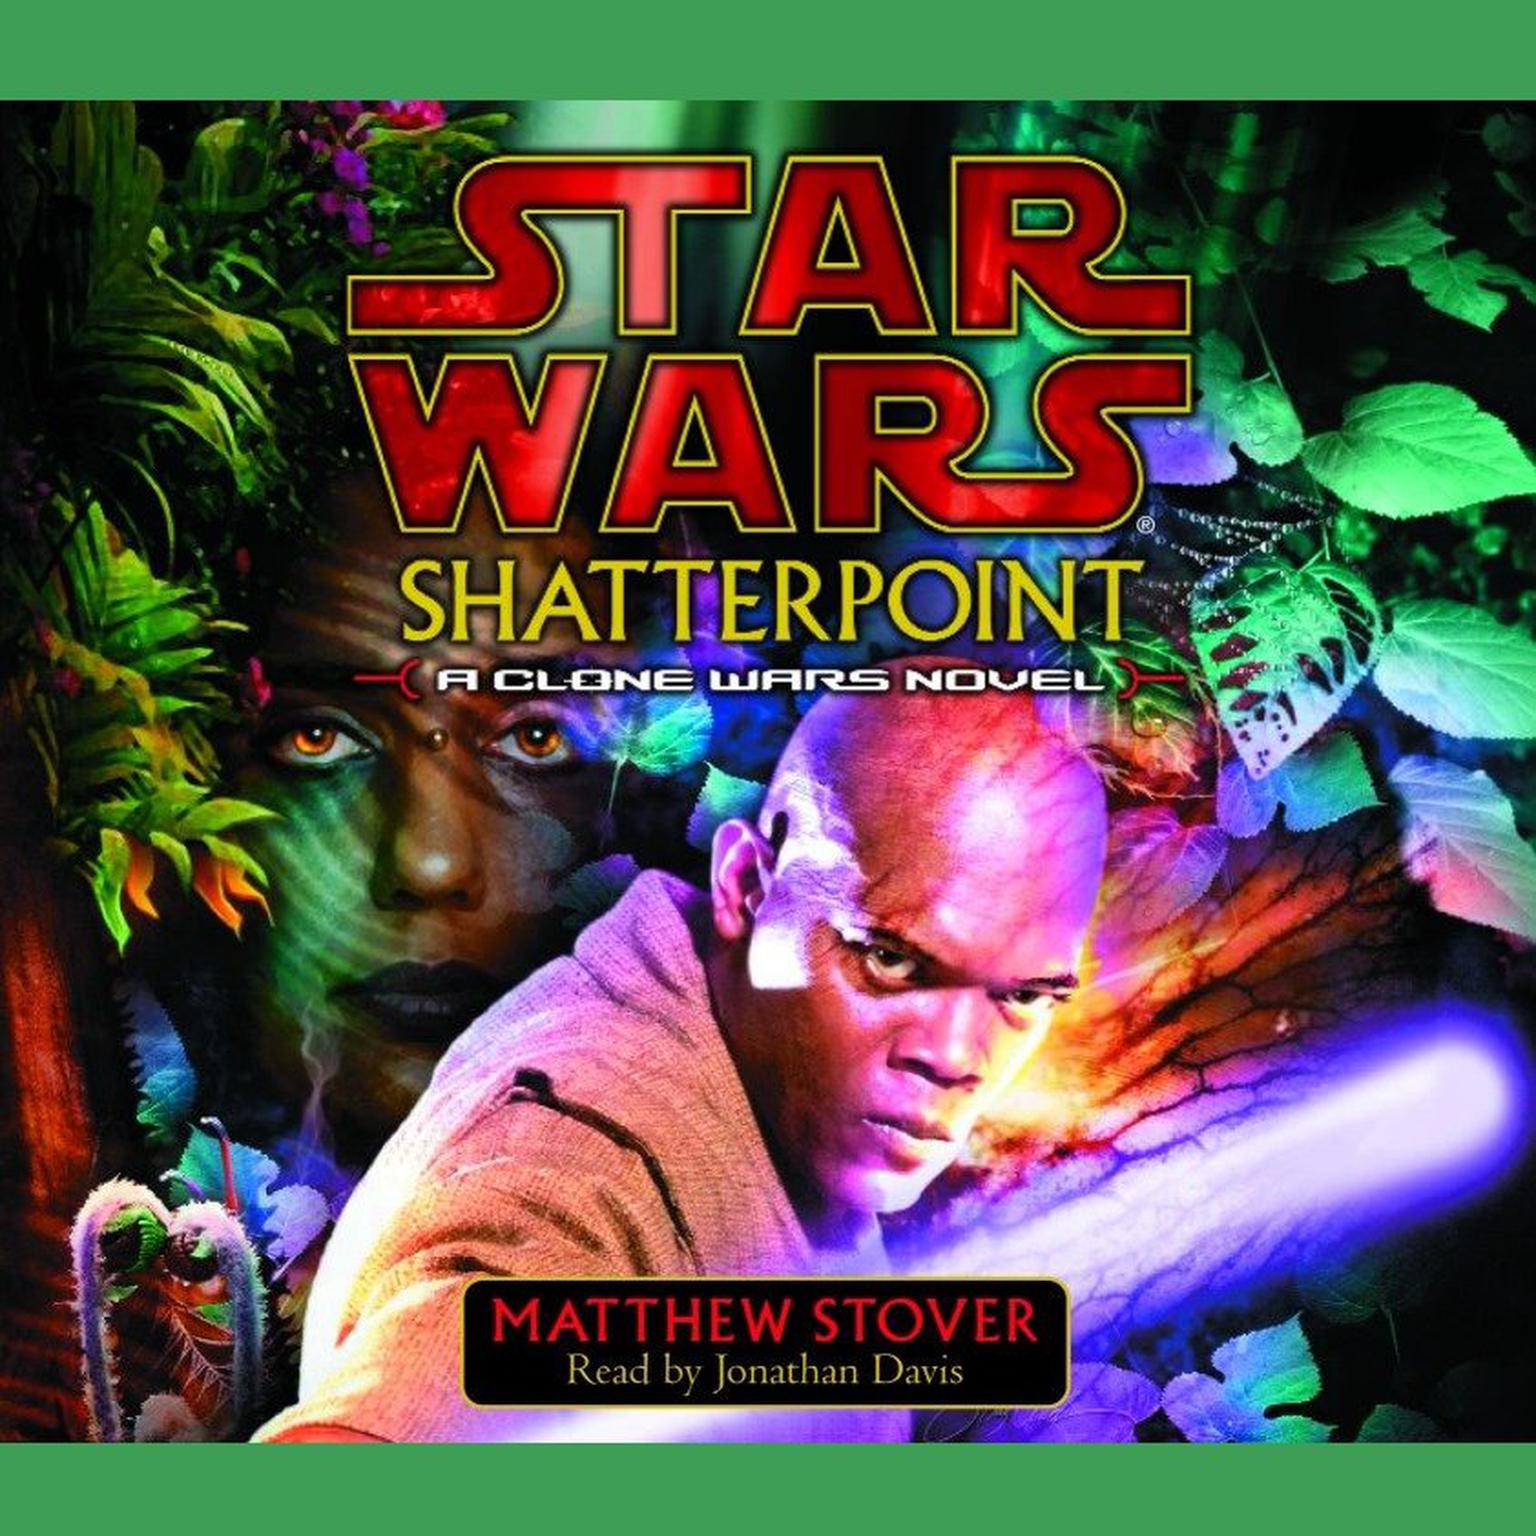 Star Wars: Shatterpoint (Abridged): A Clone Wars Novel Audiobook, by Matthew Stover